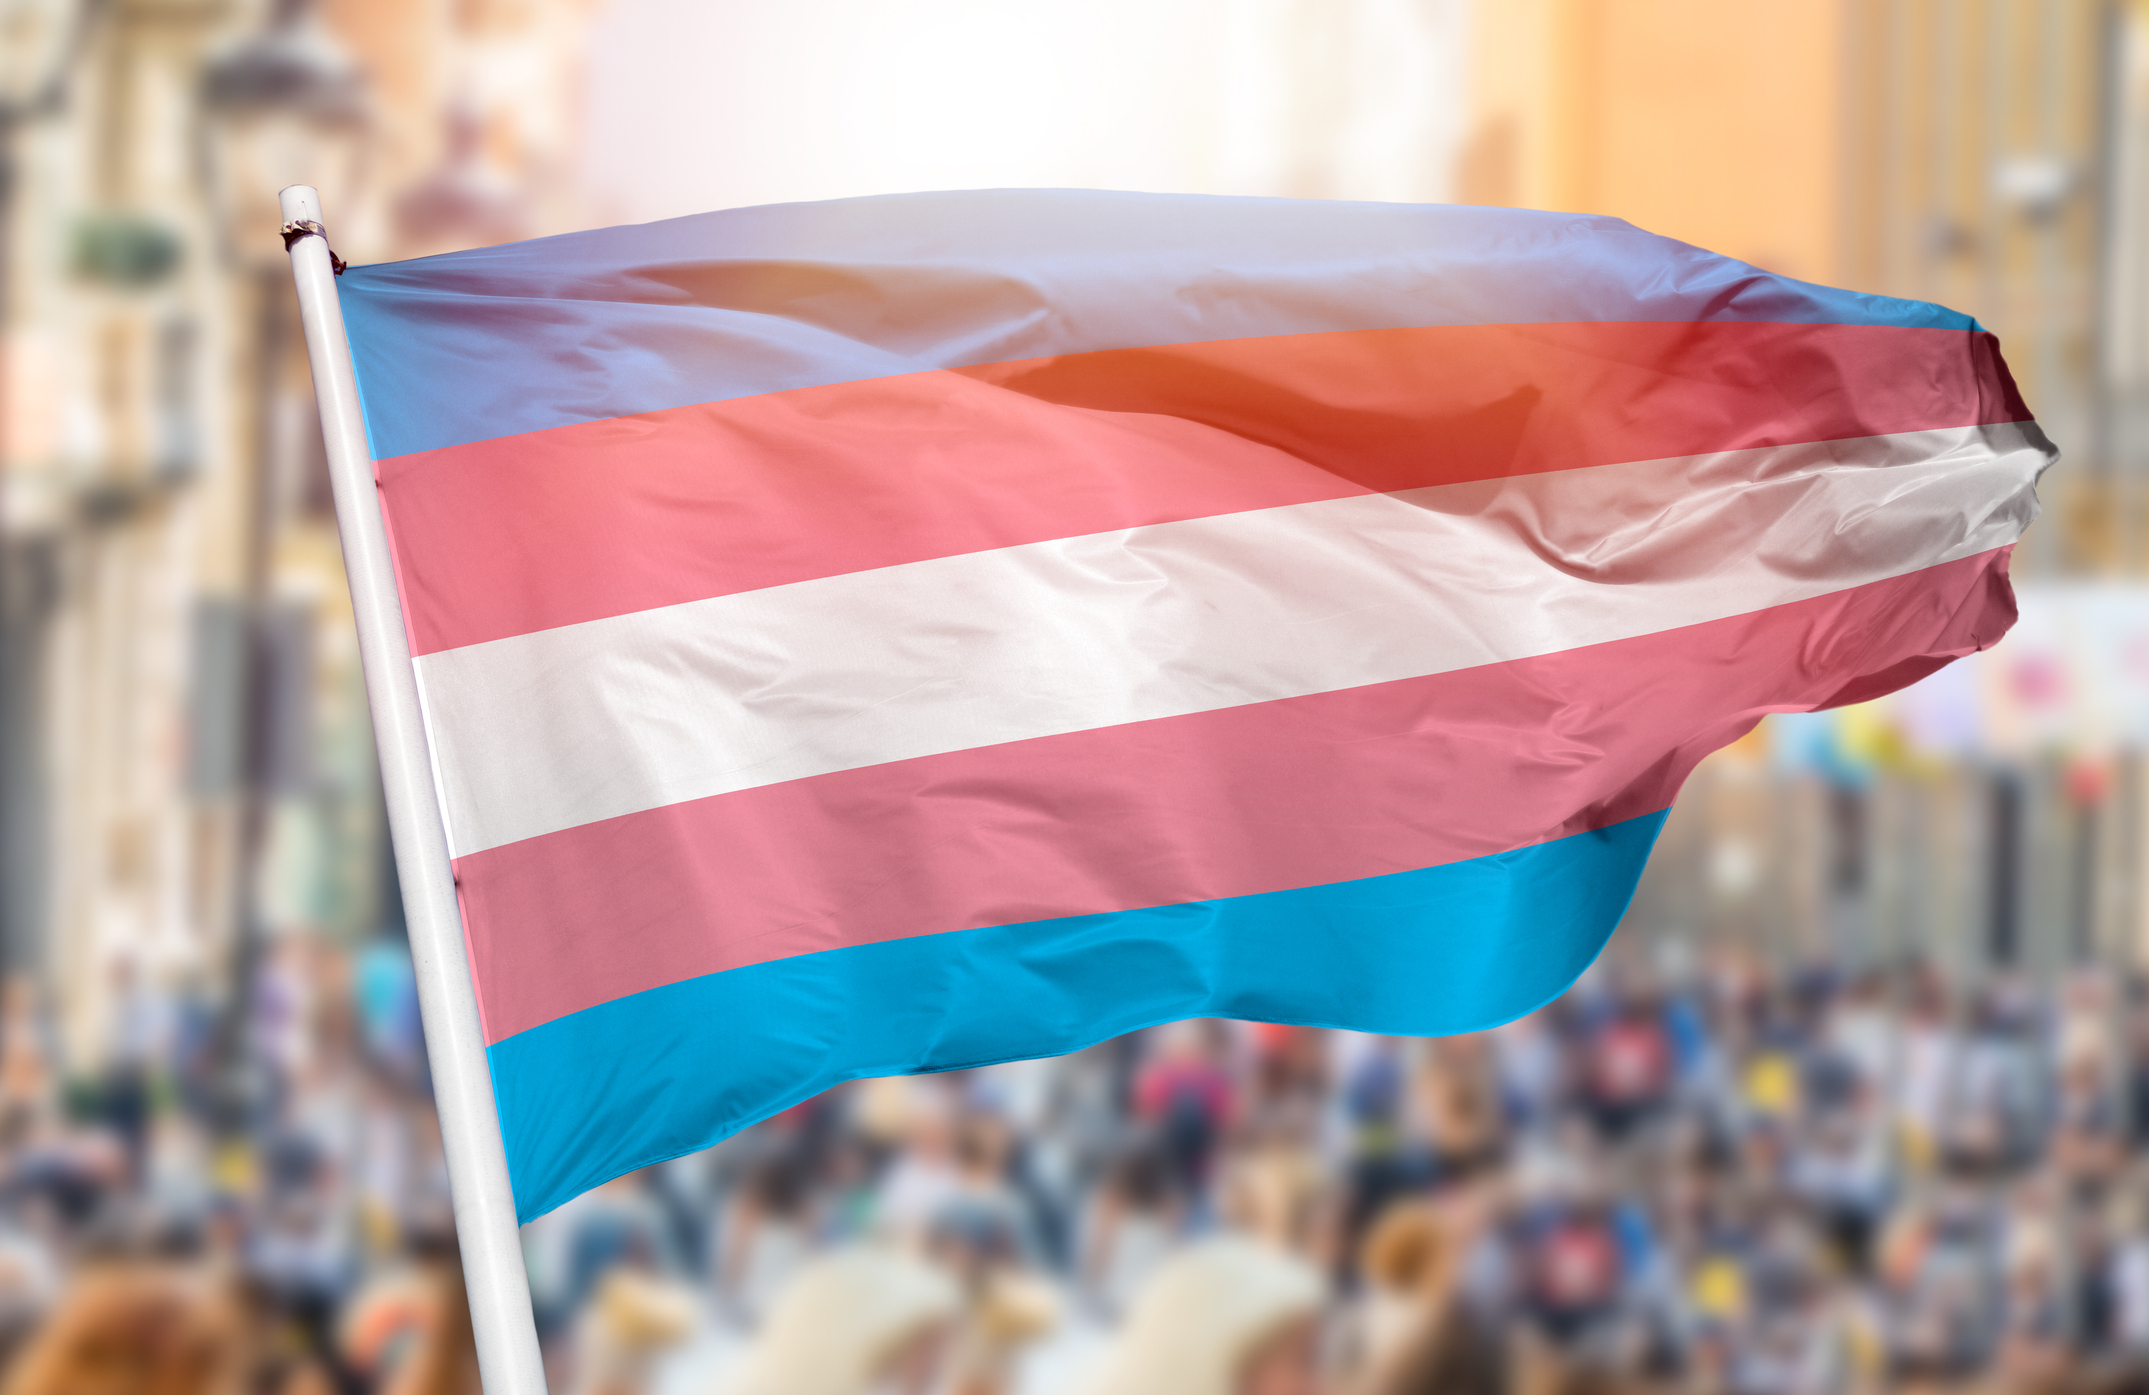 Transgender Day of Visibility is March 31